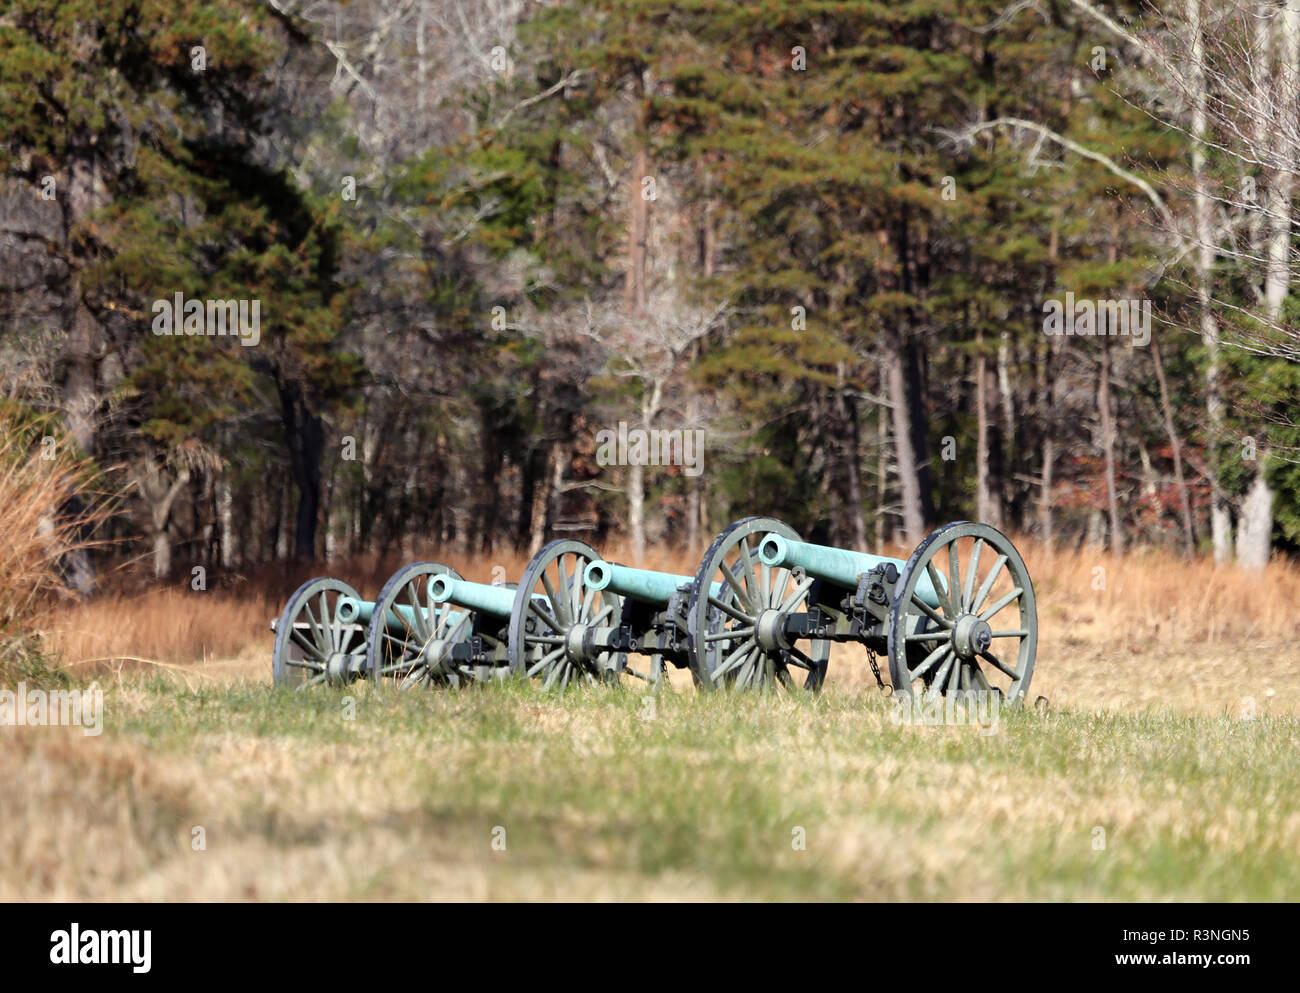 Civil War cannons in alignment on battlefield Stock Photo